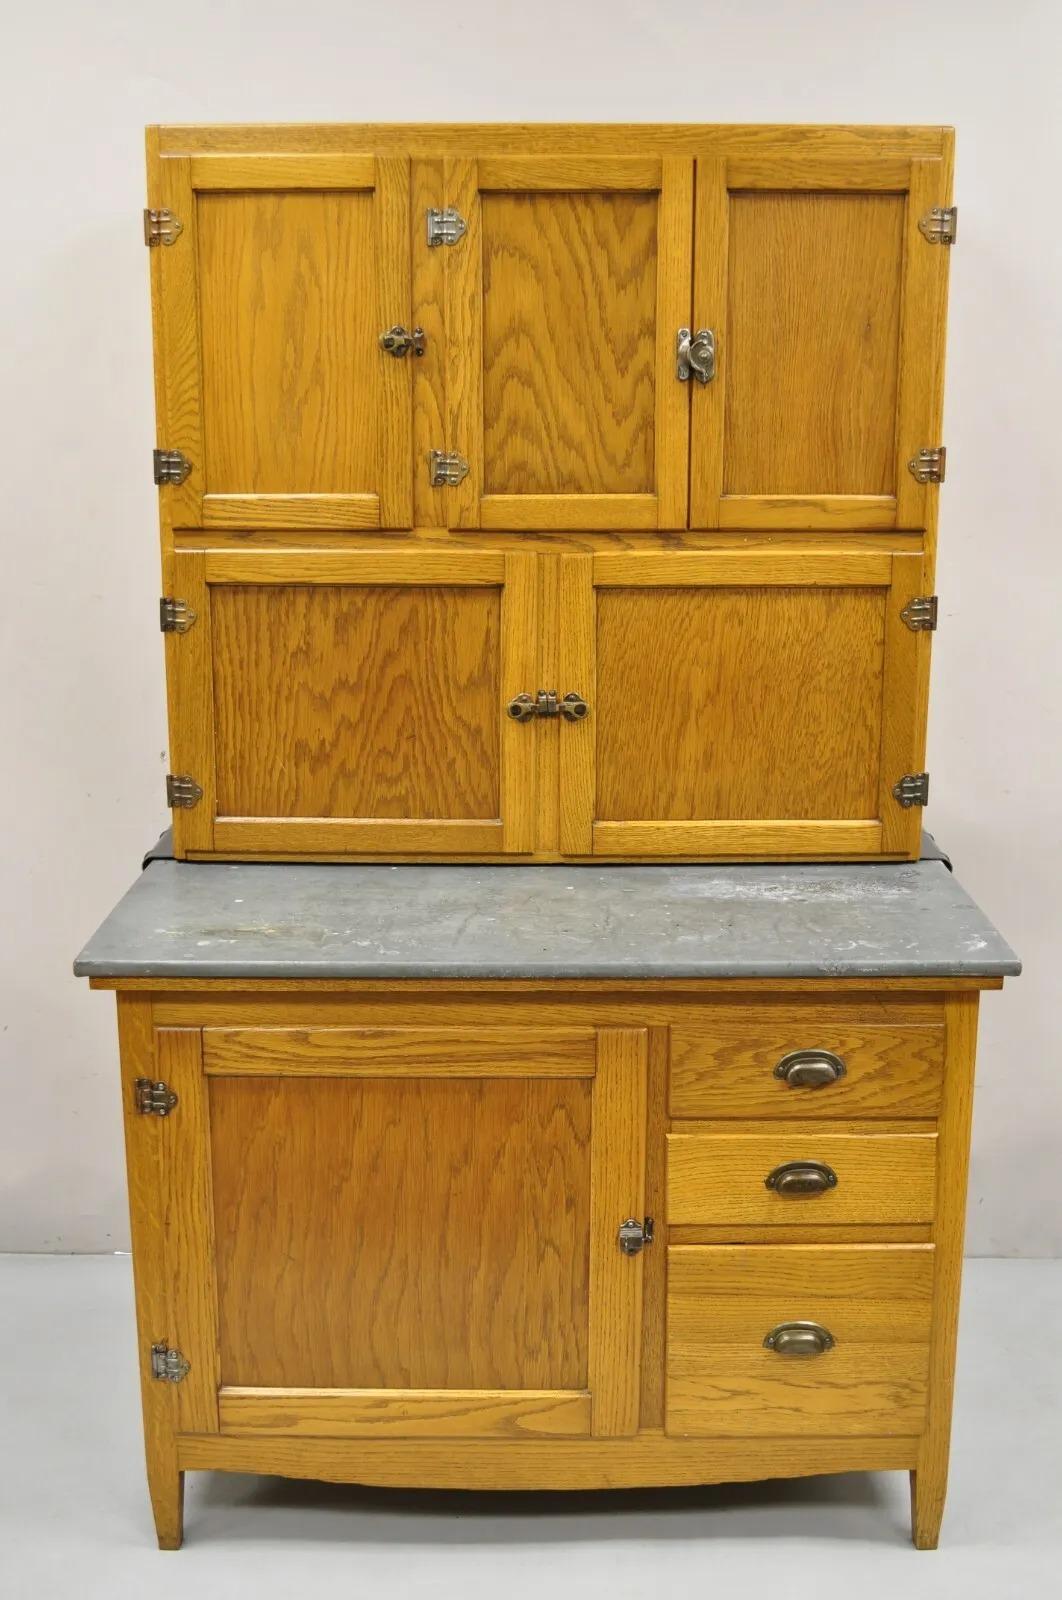 Antique Oak Wood Hoosier Style Cabinet with Pull Out Zinc Metal Top  Item featured is a 2 part construction, beautiful oak wood, pull out surface with zinc metal wrapped top, very nice antique Hoosier. Circa Early 1900s..
Measurements: 
Overall: 68